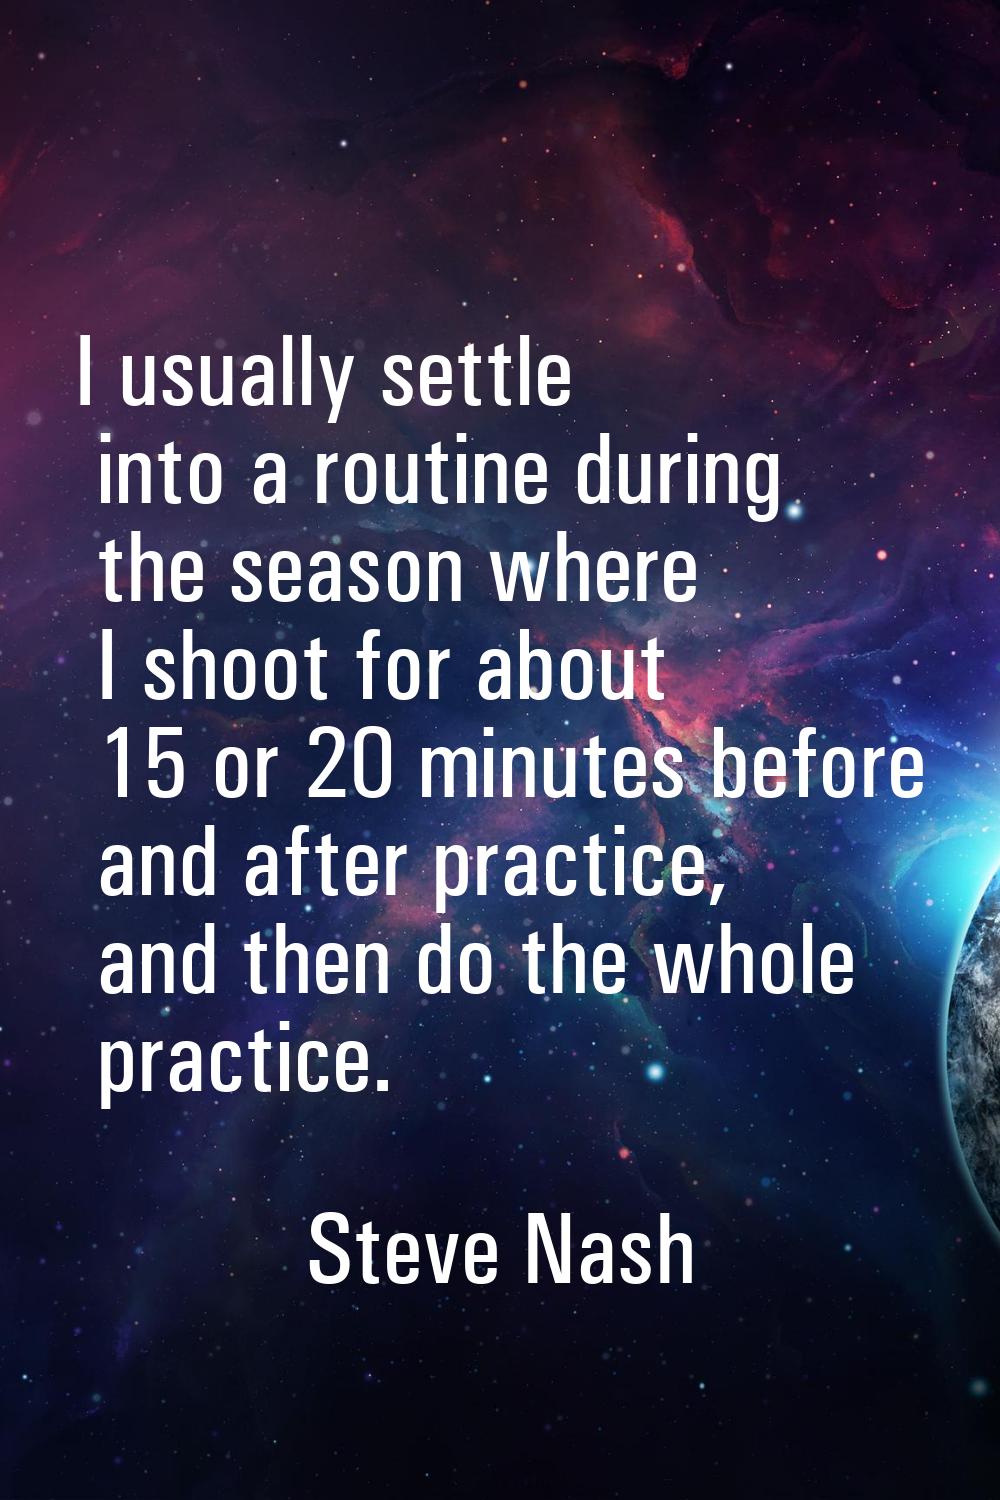 I usually settle into a routine during the season where I shoot for about 15 or 20 minutes before a